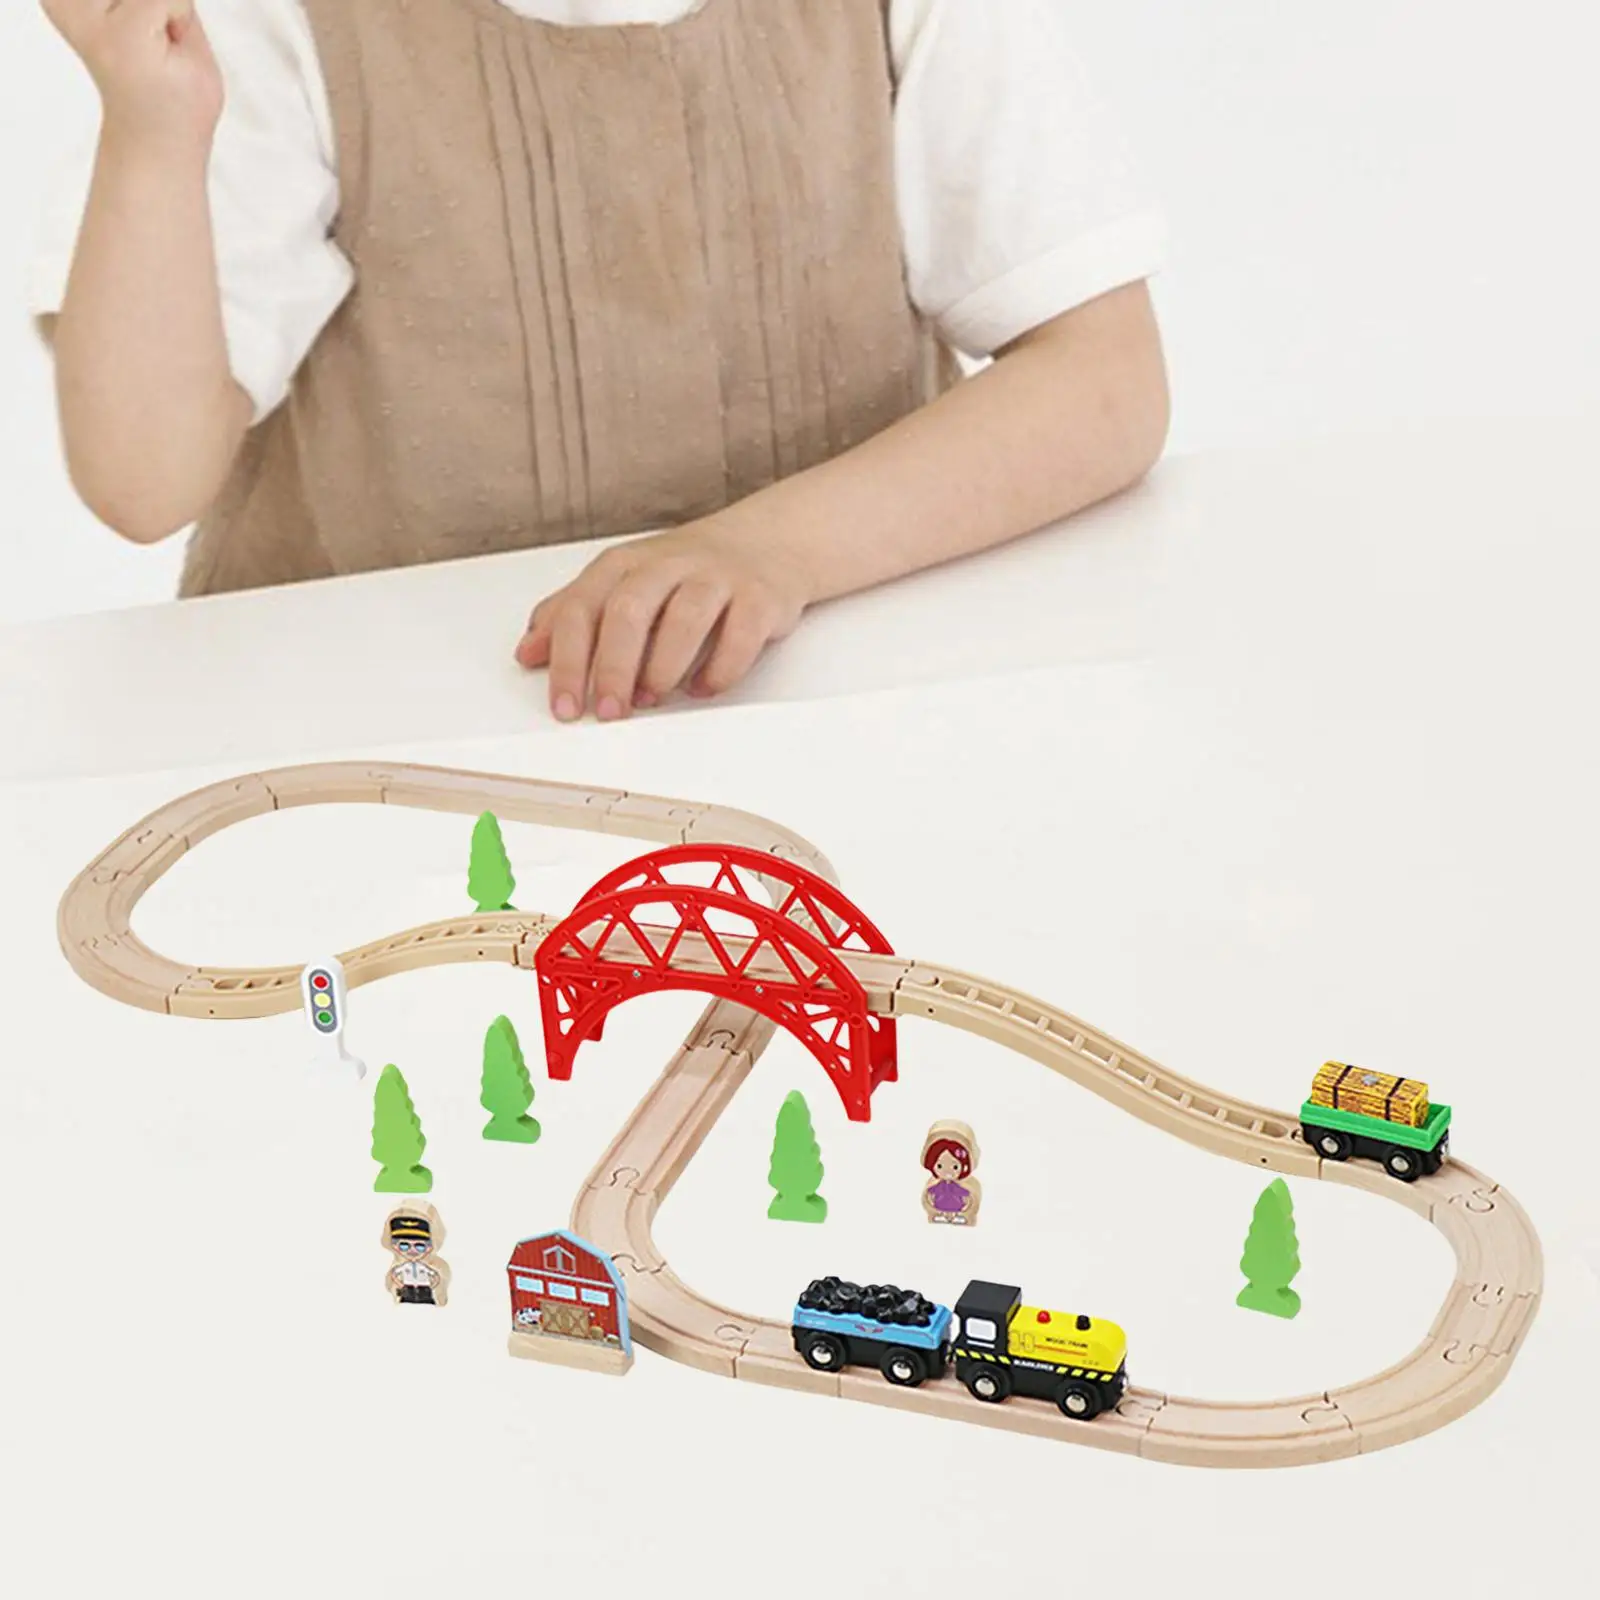 Railway Track toy Train Expansion Set Play Figurines Train Track Set Accessories for Cultivate Imagination Birthday Gift